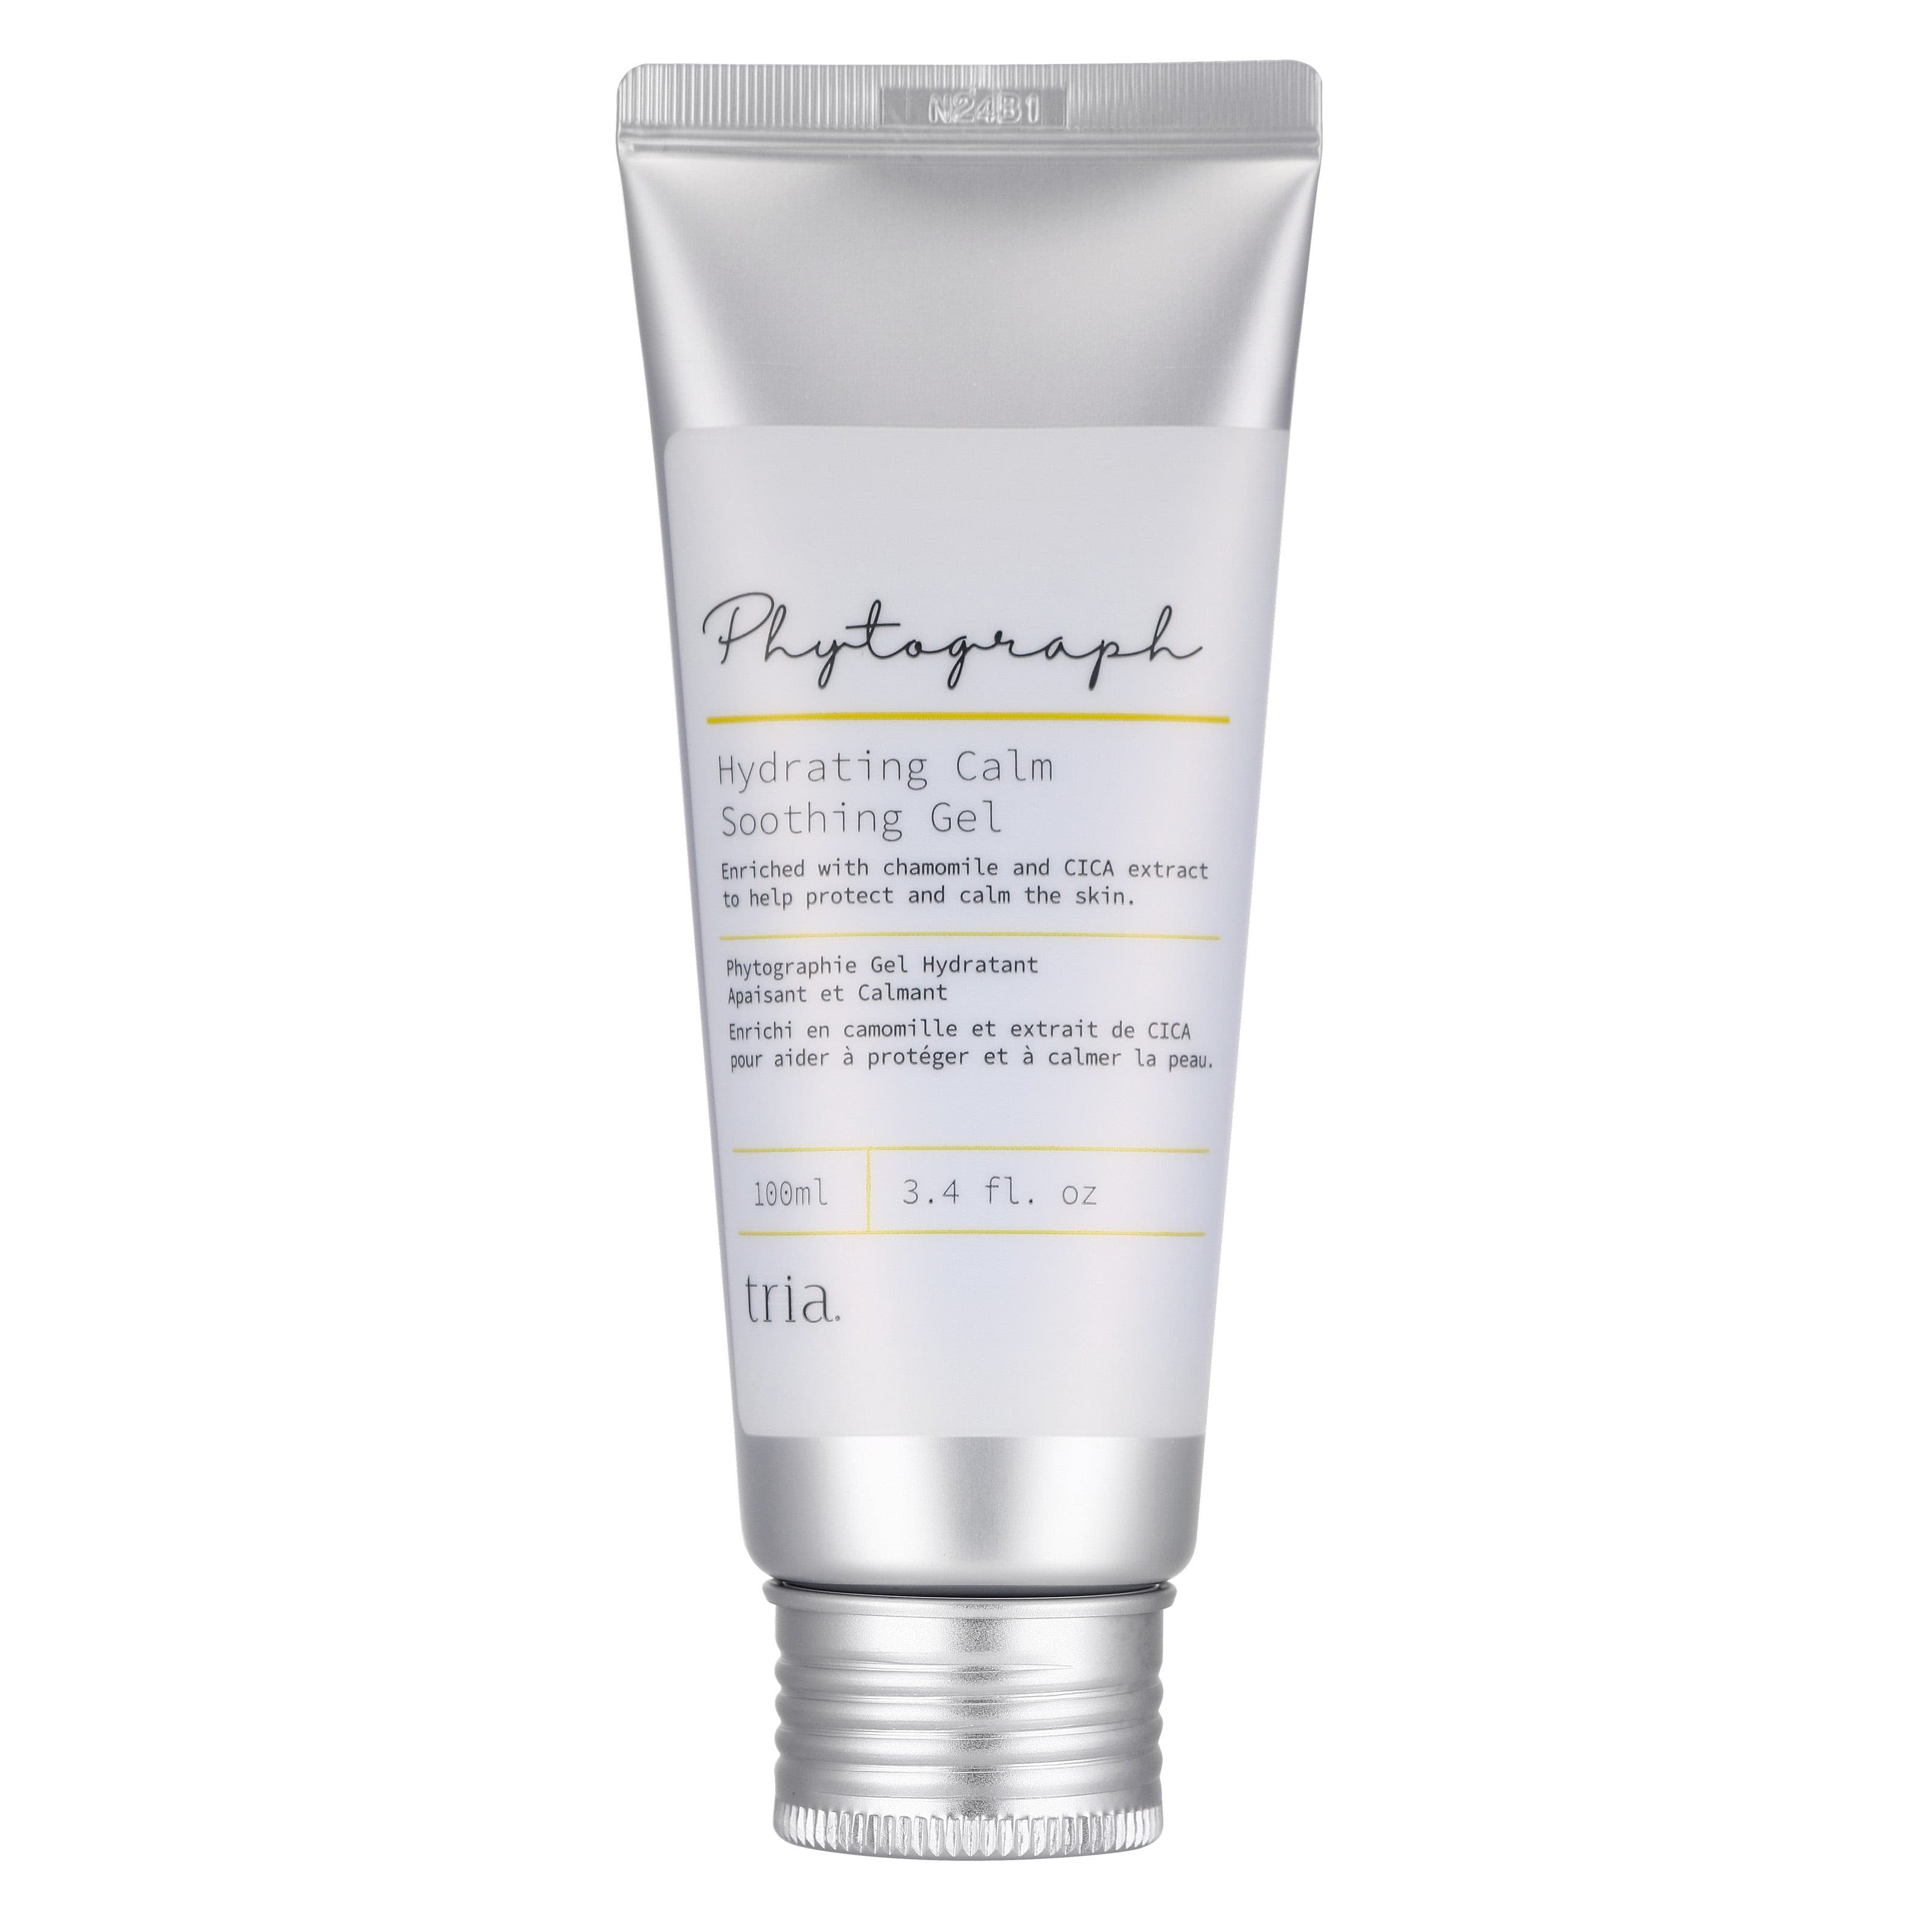 Phytograph Hydrating Calm Soothing Gel